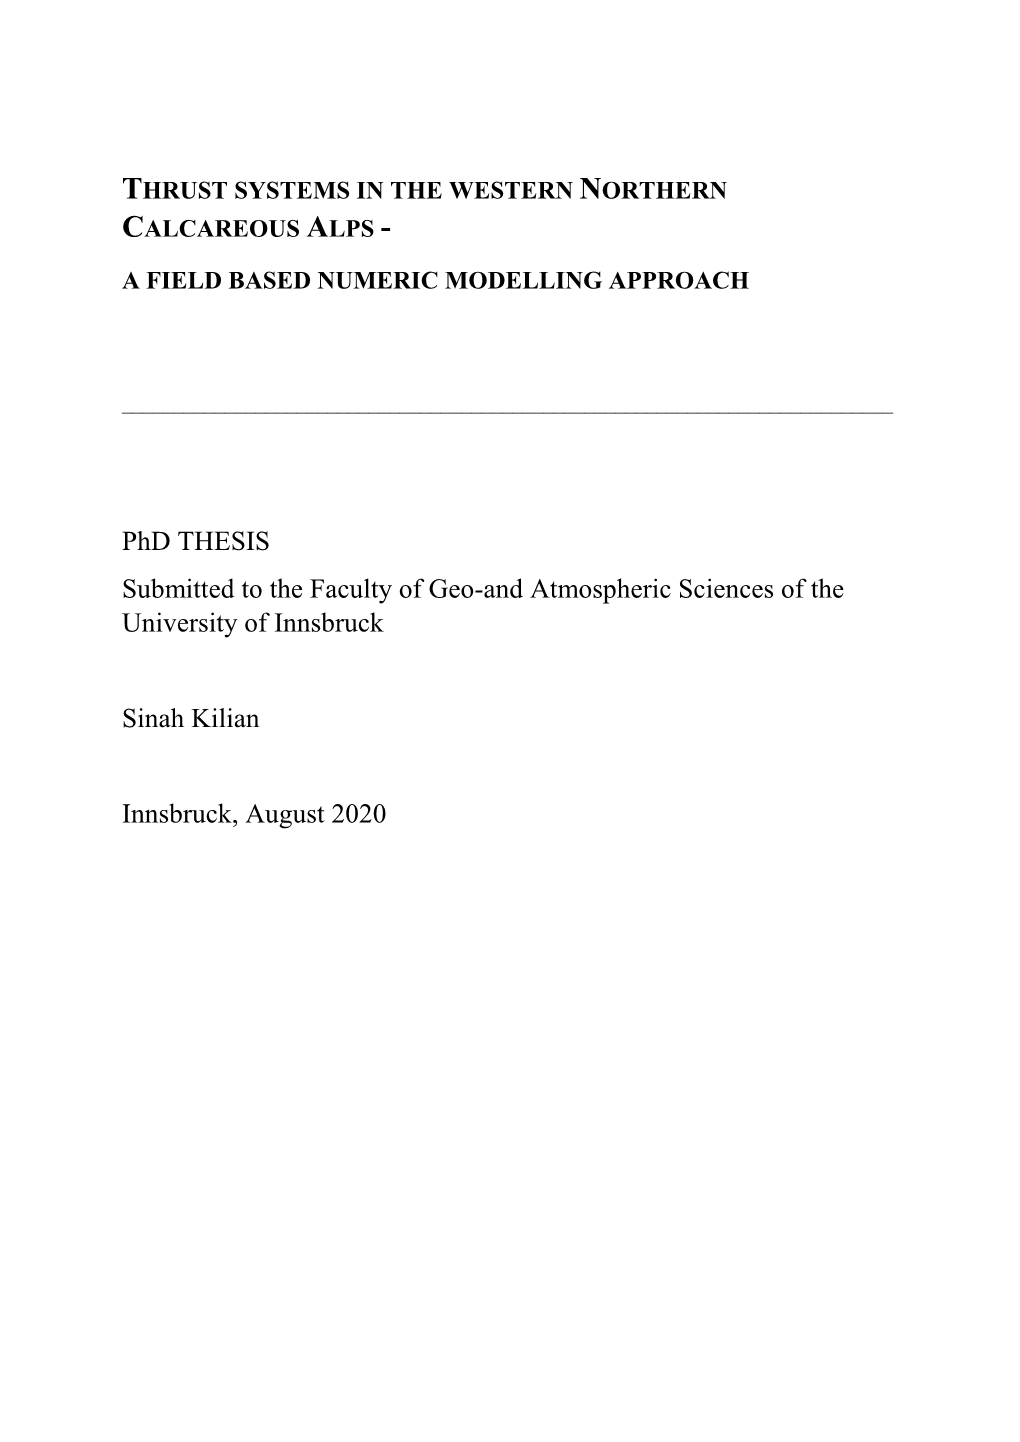 Phd THESIS Submitted to the Faculty of Geo-And Atmospheric Sciences of the University of Innsbruck